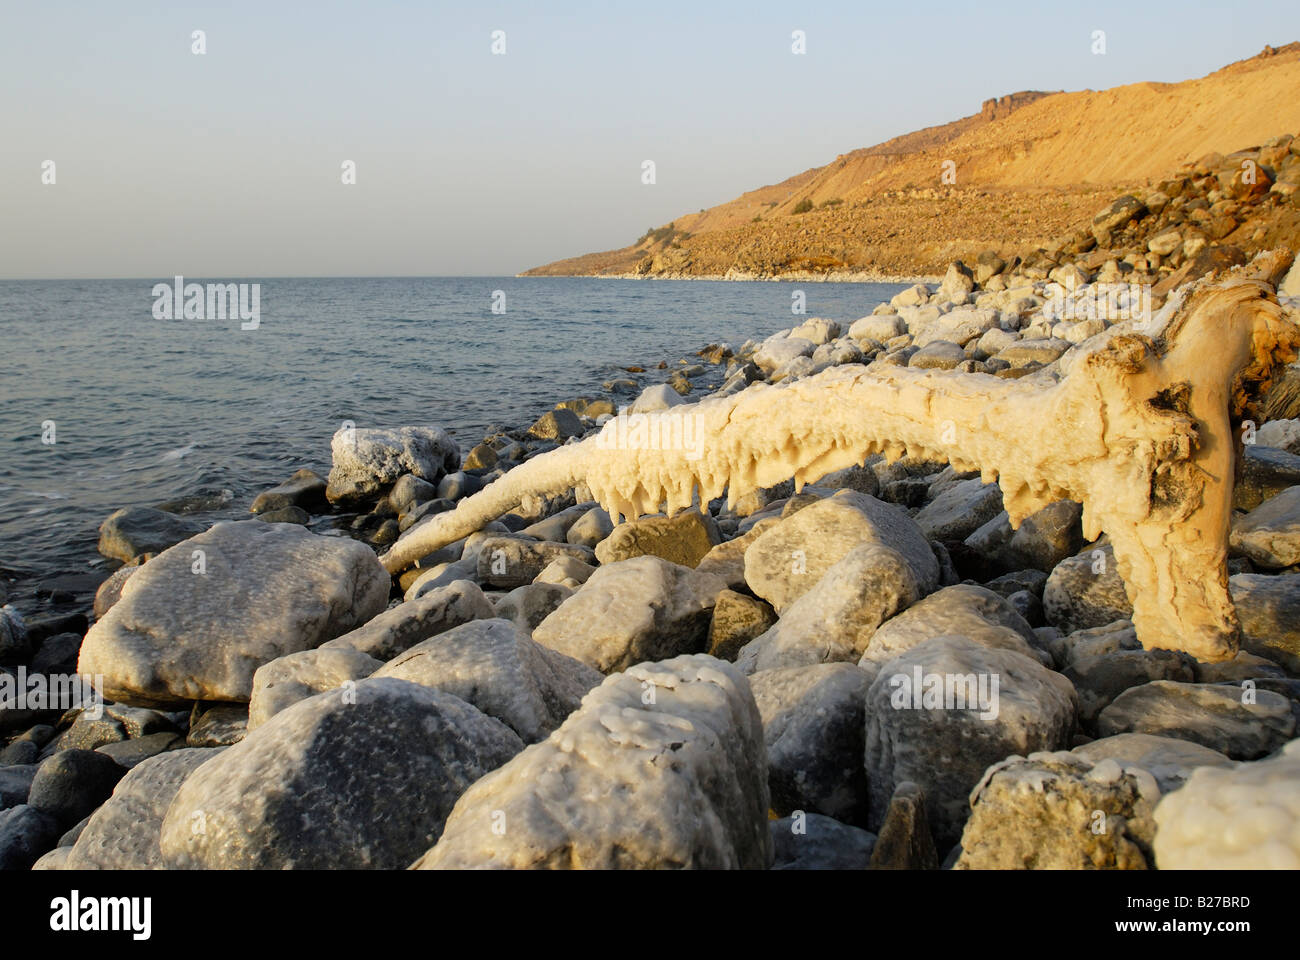 rocks and a piece of wood with salt at coastline of Dead Sea, Jordan, Arabia, lowest place on earth Stock Photo